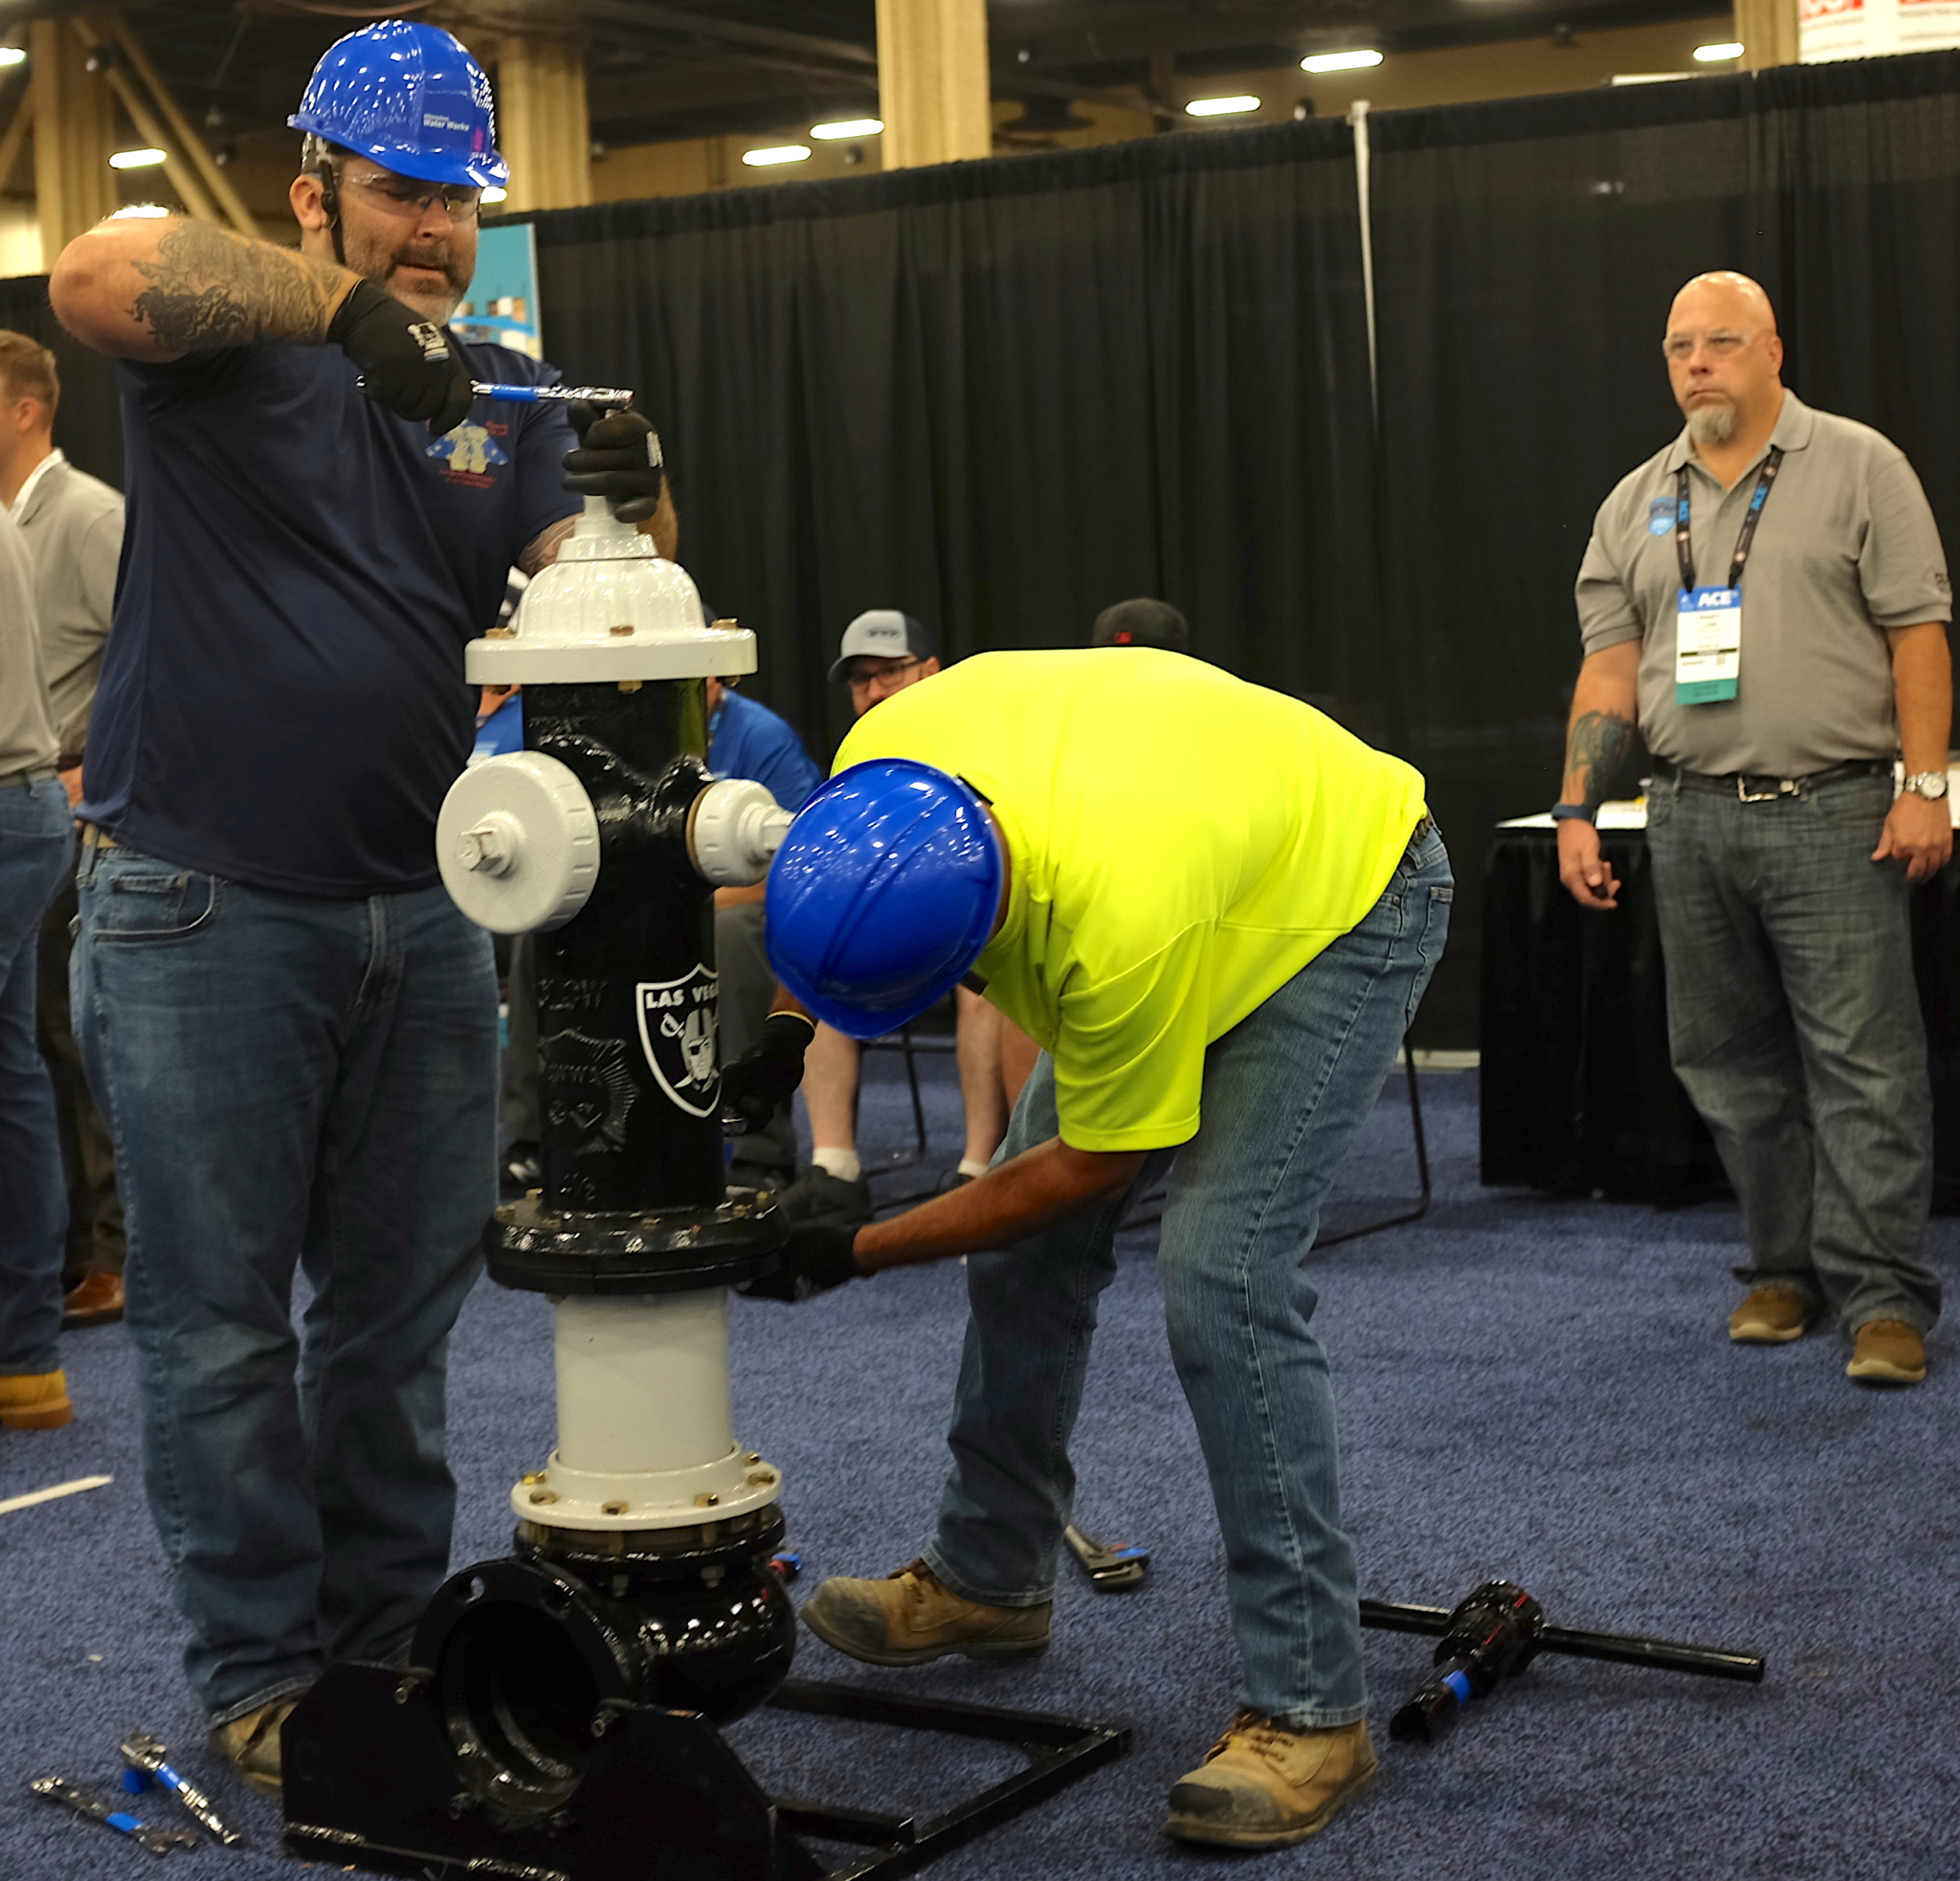 Workers from the city of Milwaukee participate in the Hydrant Hysteria competition to assemble a hydrant as quickly as possible